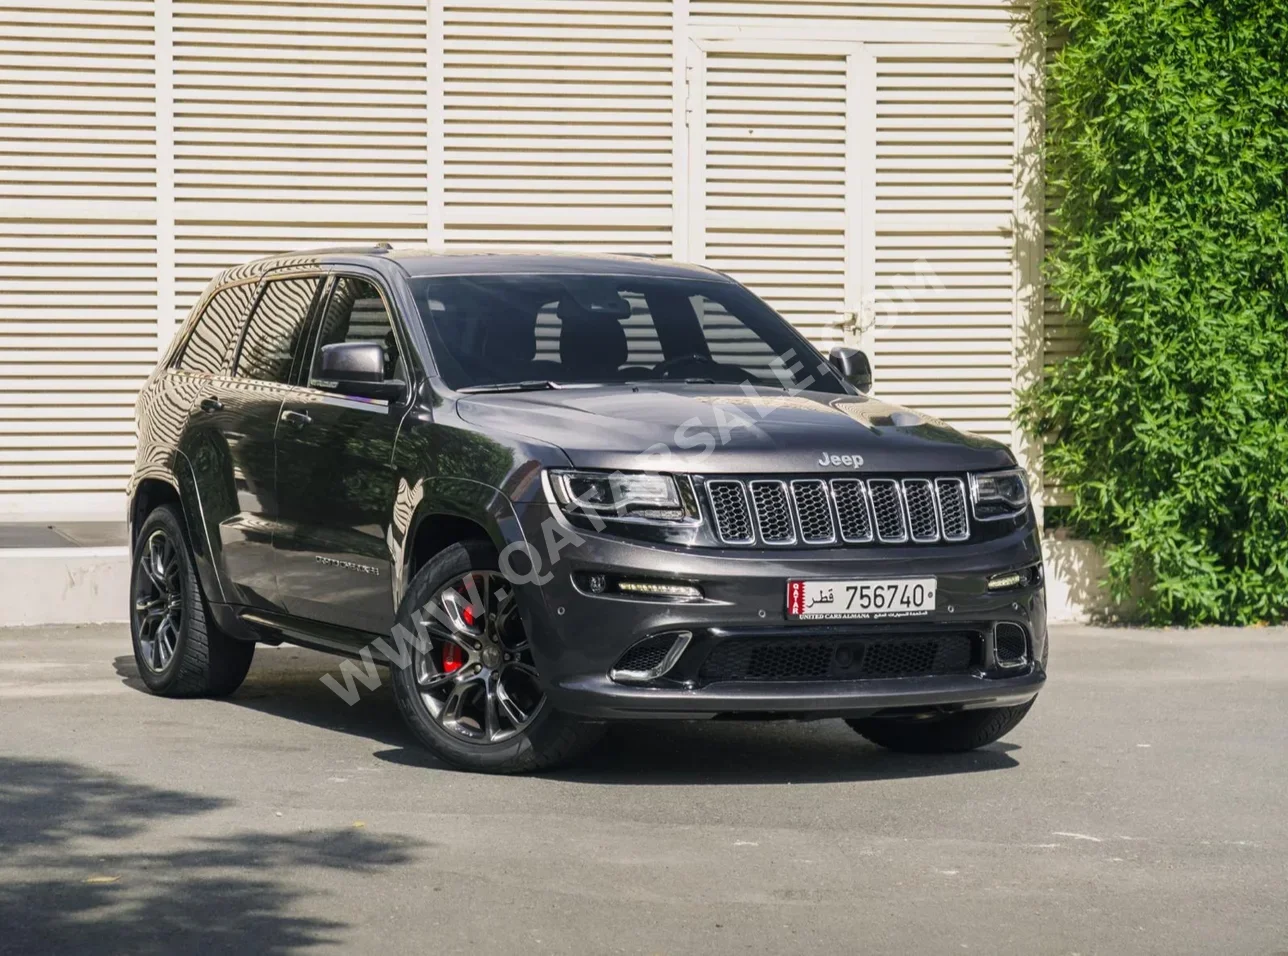 Jeep  Grand Cherokee  SRT  2015  Automatic  56,000 Km  8 Cylinder  Four Wheel Drive (4WD)  SUV  Gray